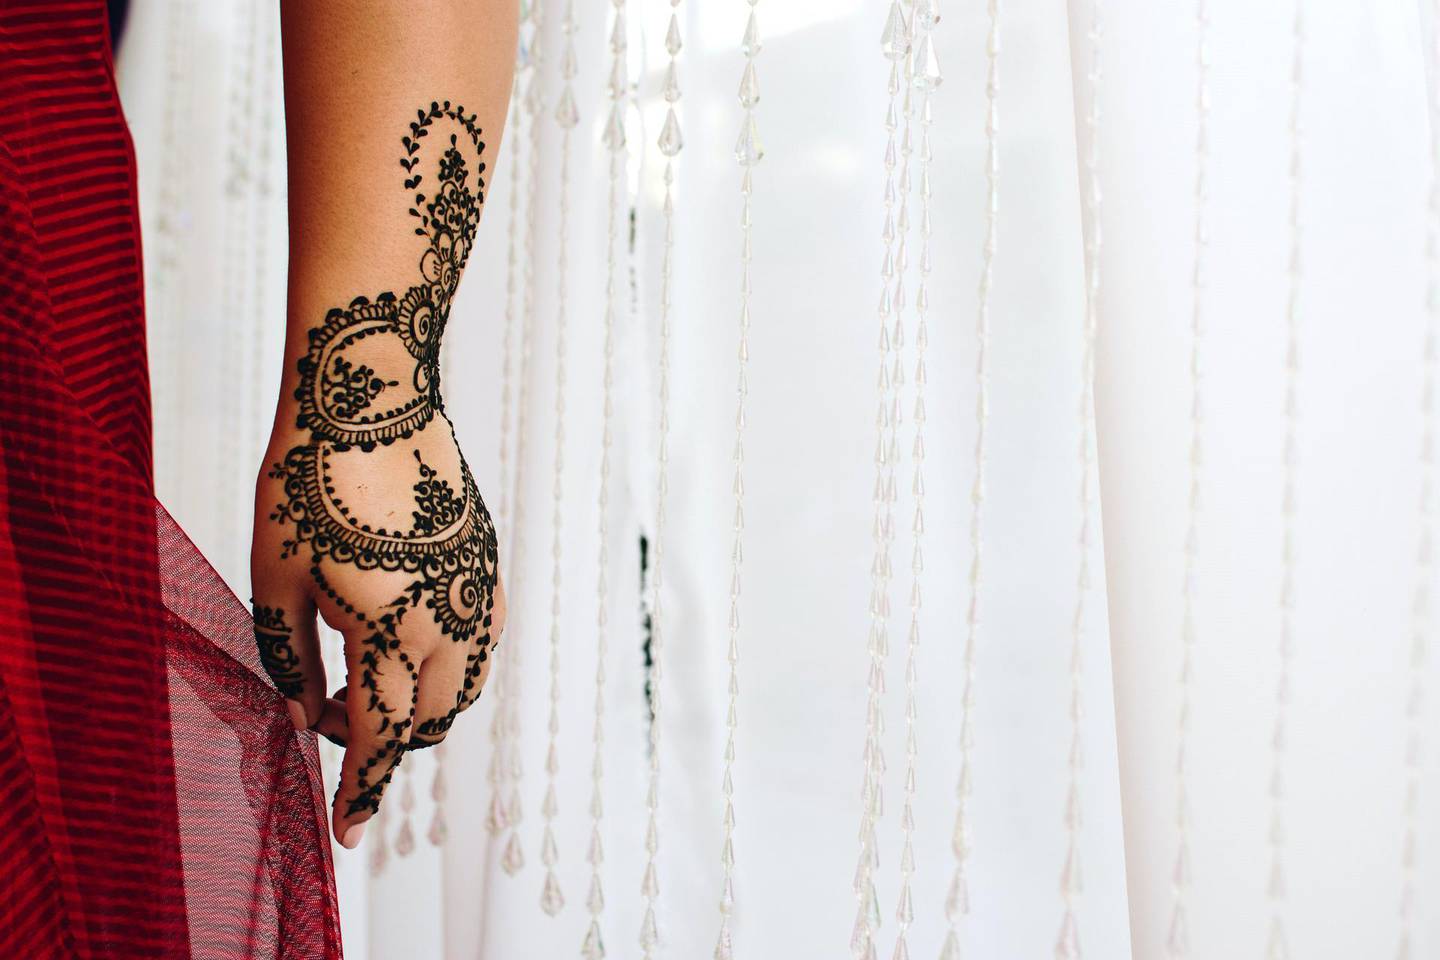 Dubai Henna delivers the product to customers's doorsteps. Unsplash